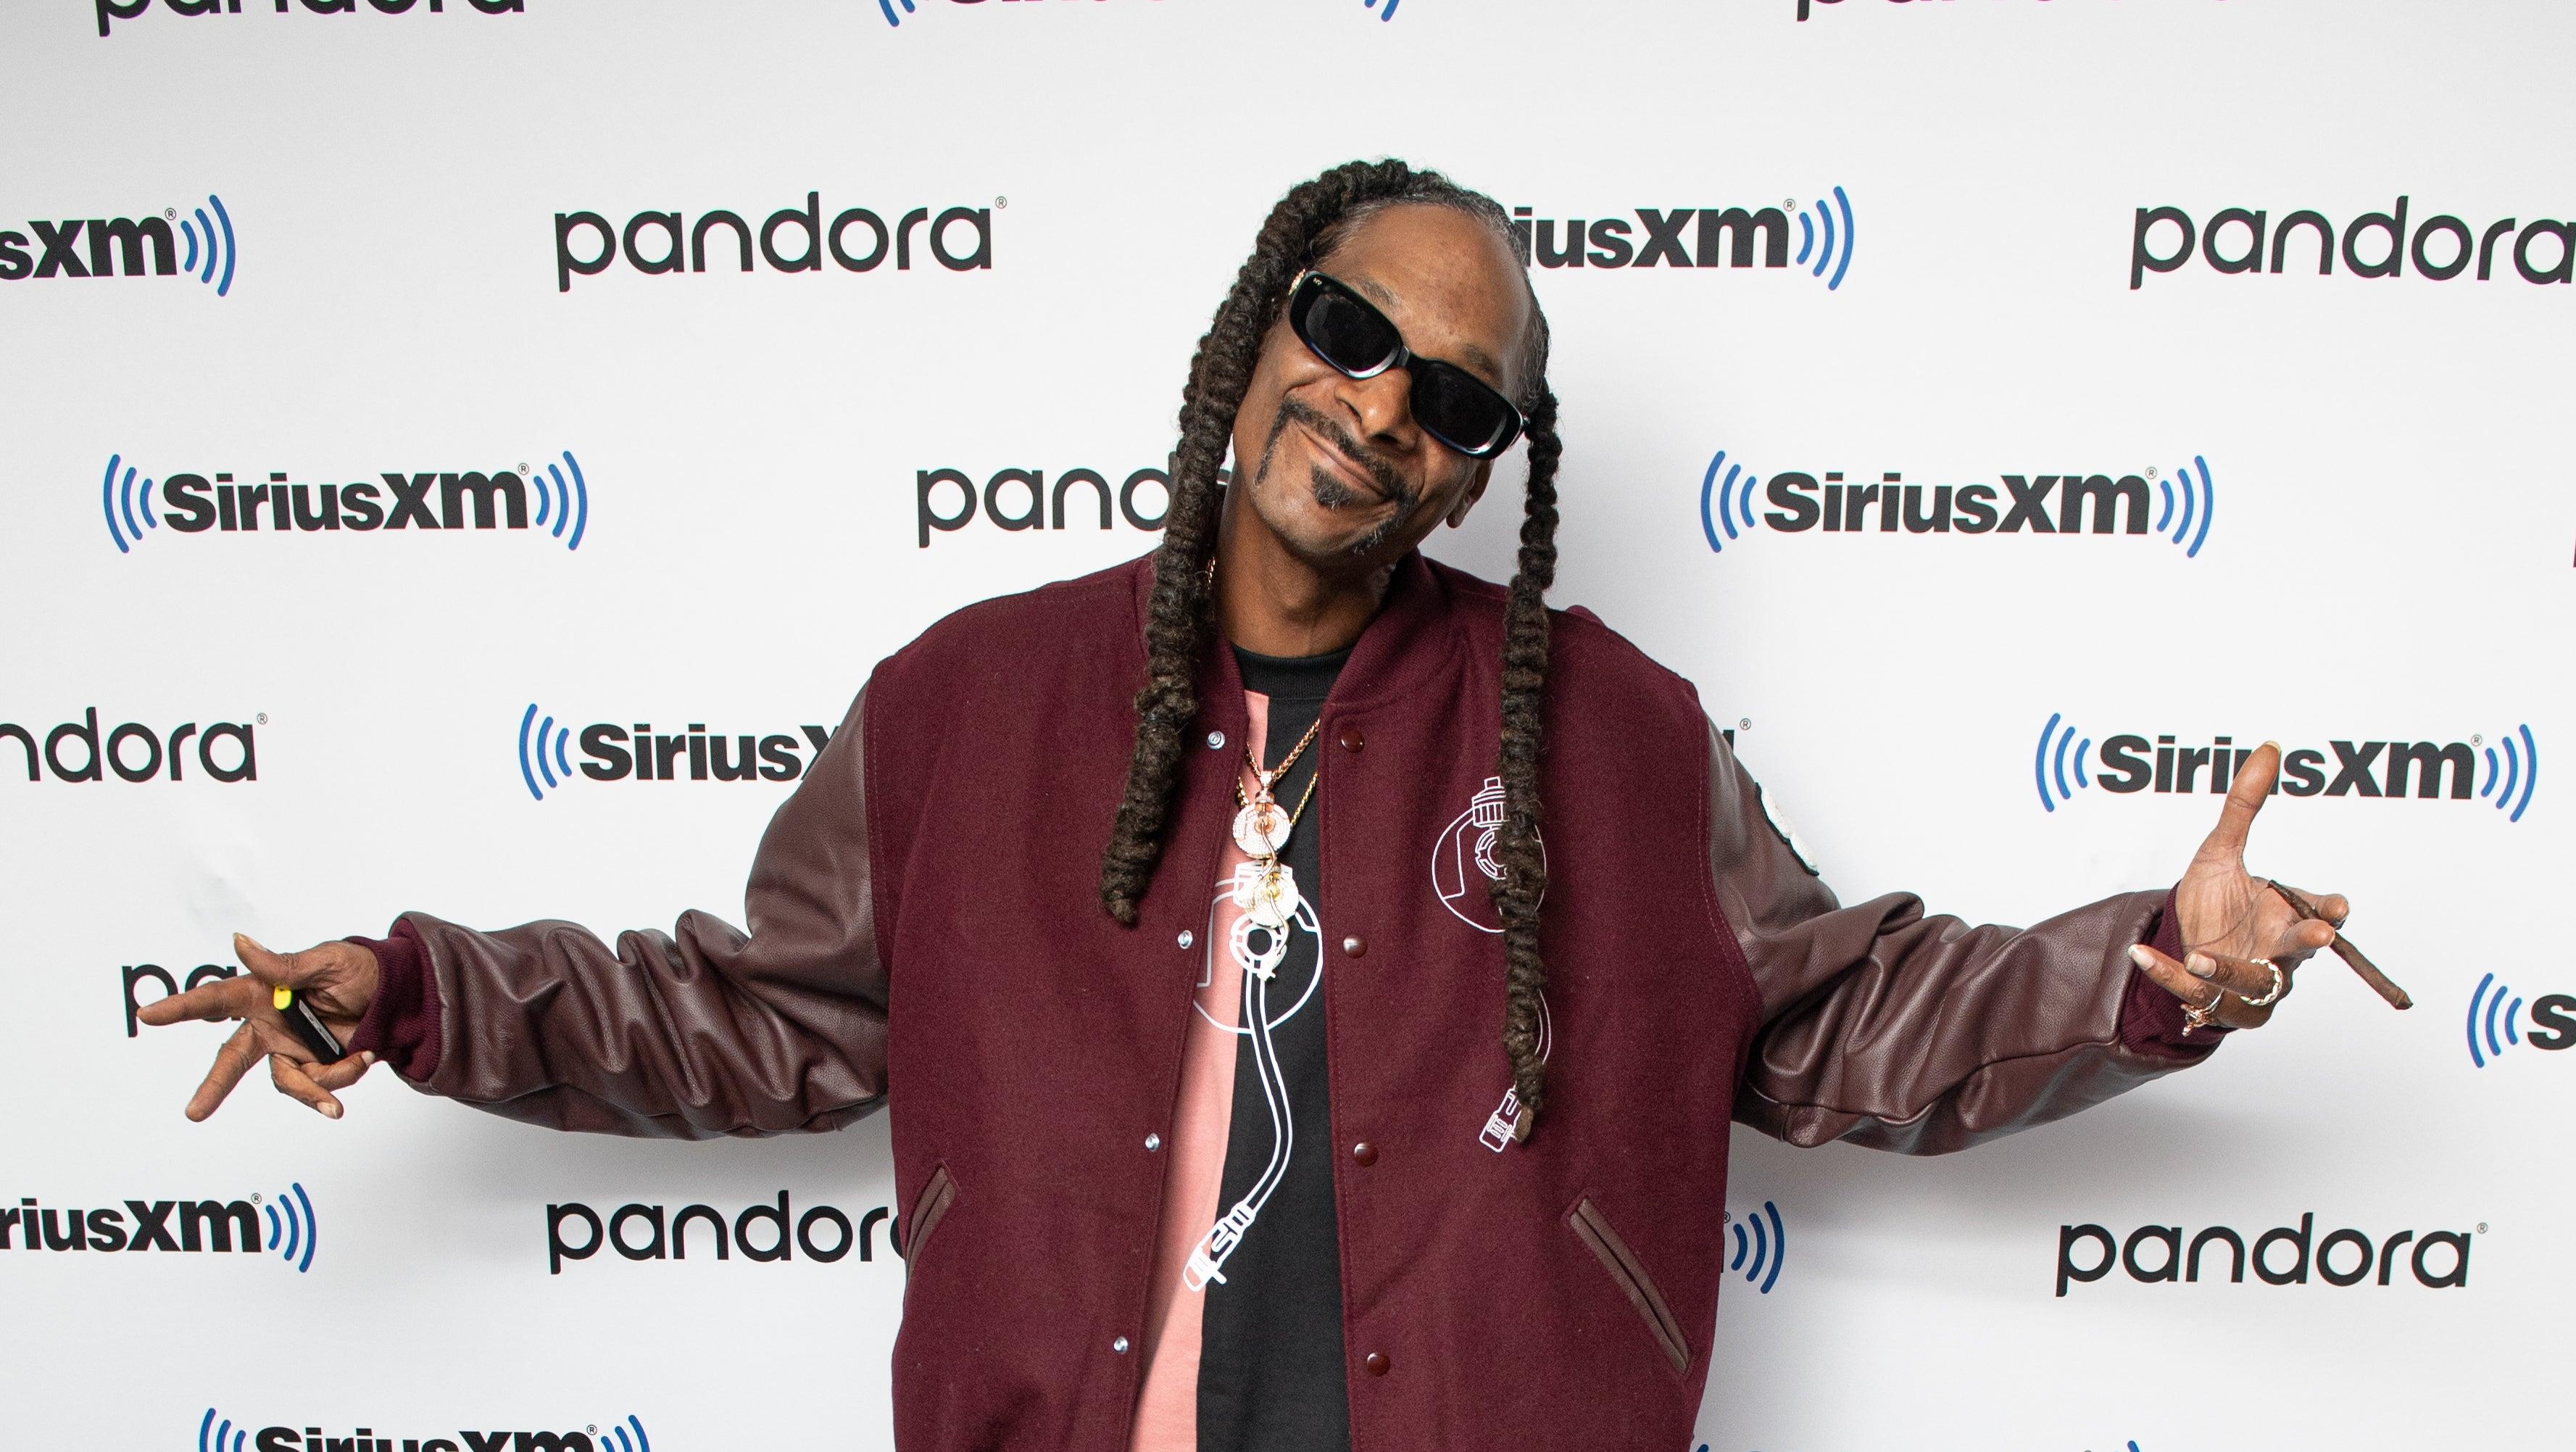 Finally: Snoop Dogg releases track that’s just him rapping over the Curb Your Enthusiasm theme